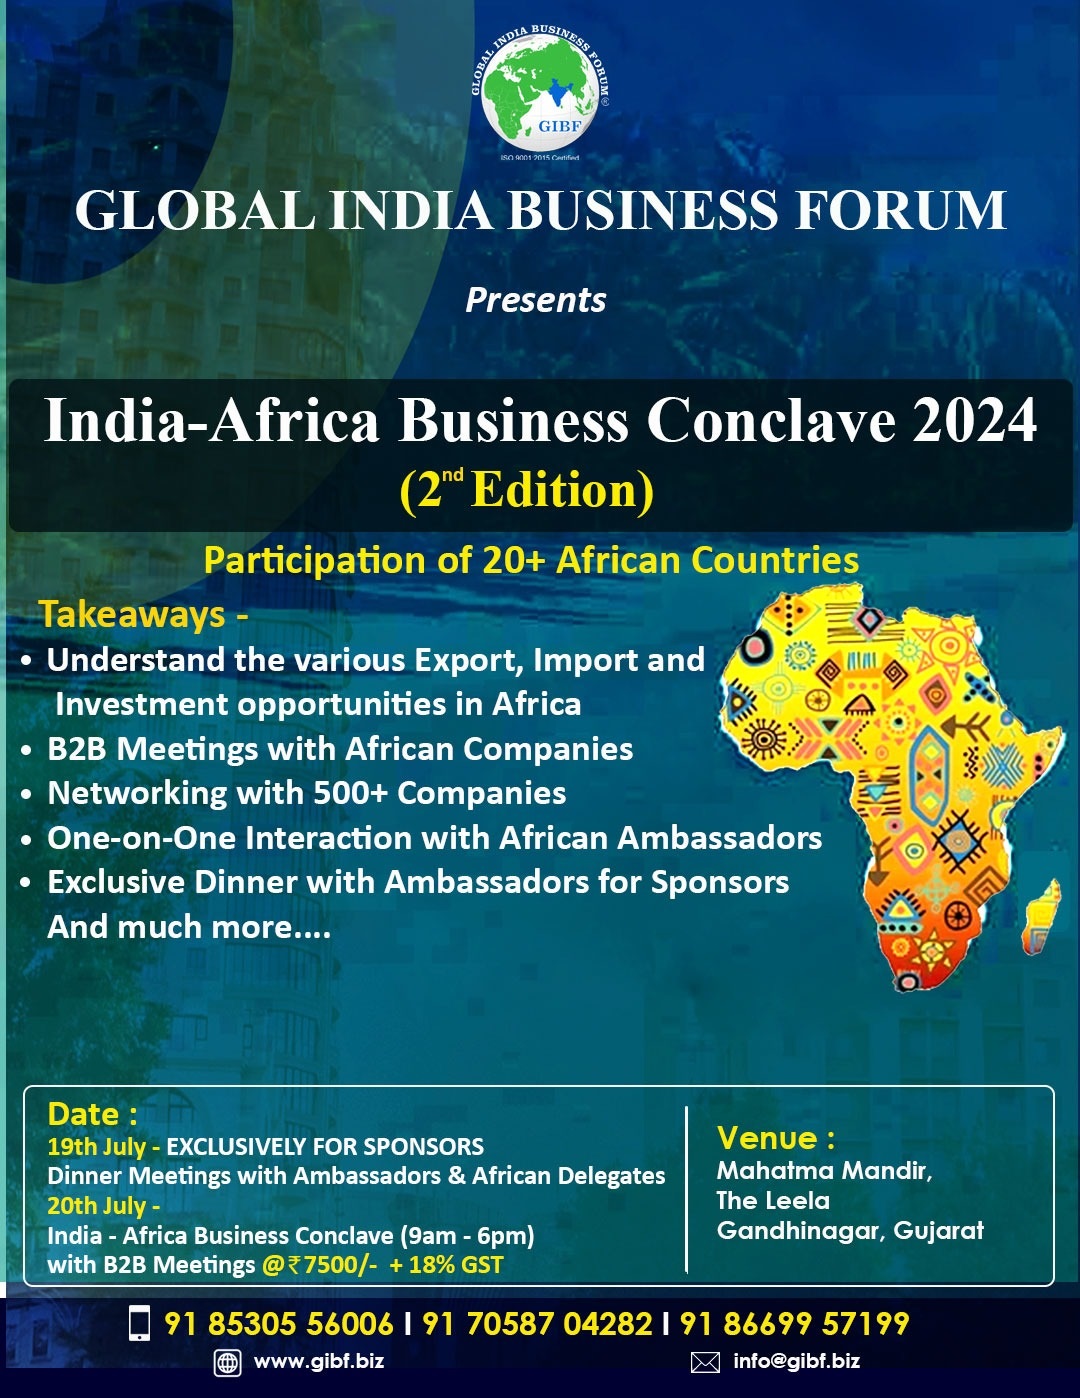 India Africa Business Conclave - 2024 Post